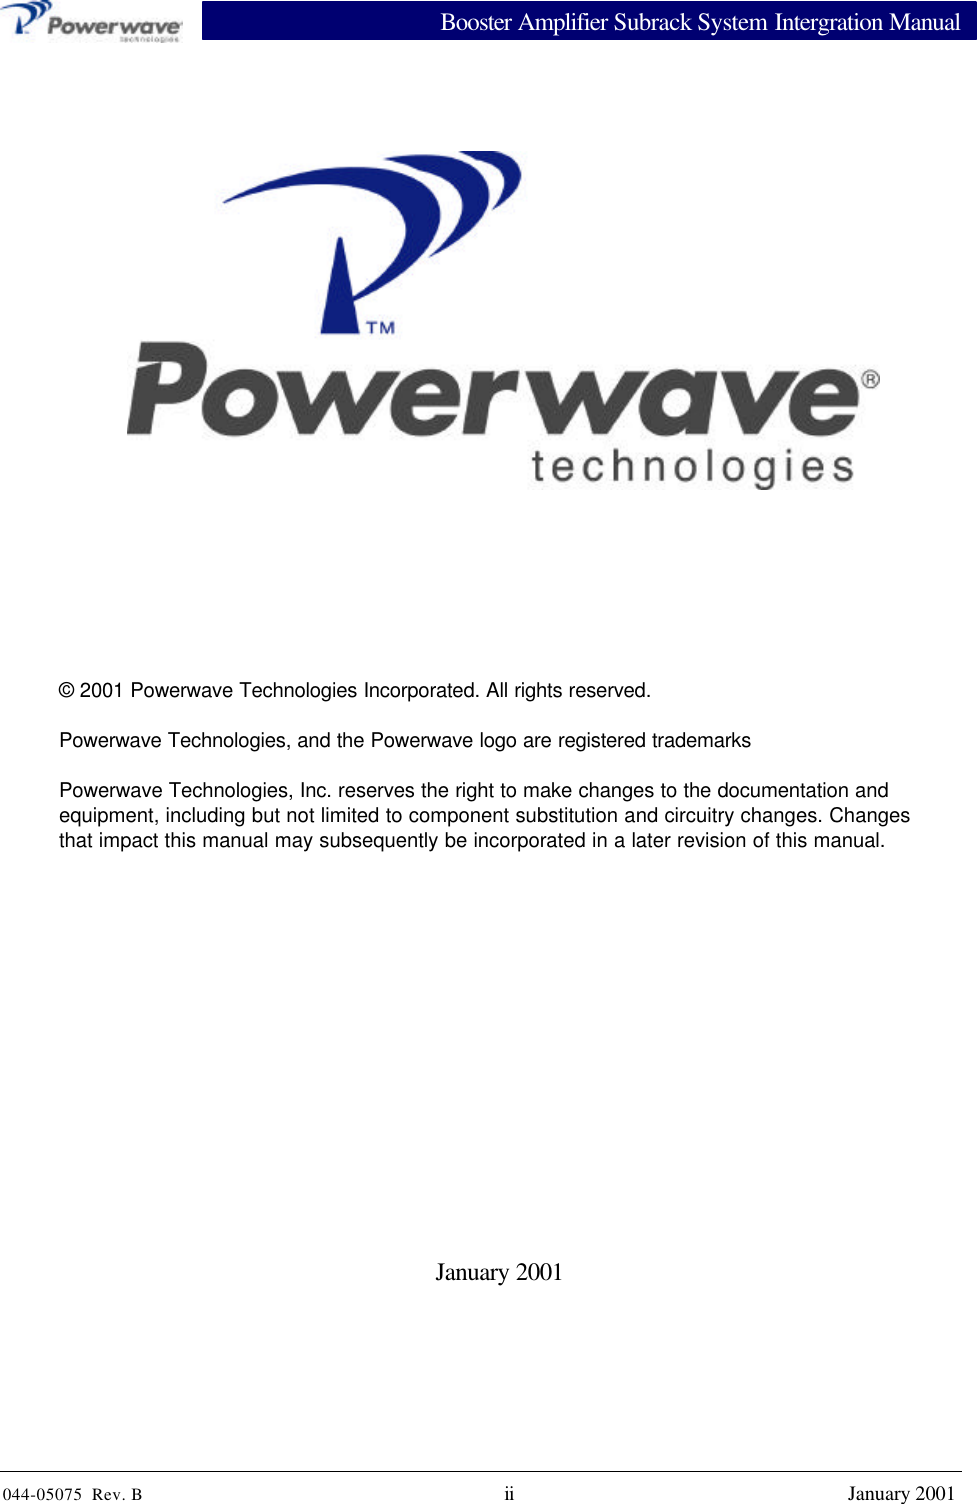 Booster Amplifier Subrack System Intergration Manual044-05075  Rev. B ii January 2001January 2001®© 2001 Powerwave Technologies Incorporated. All rights reserved.Powerwave Technologies, and the Powerwave logo are registered trademarksPowerwave Technologies, Inc. reserves the right to make changes to the documentation andequipment, including but not limited to component substitution and circuitry changes. Changesthat impact this manual may subsequently be incorporated in a later revision of this manual.